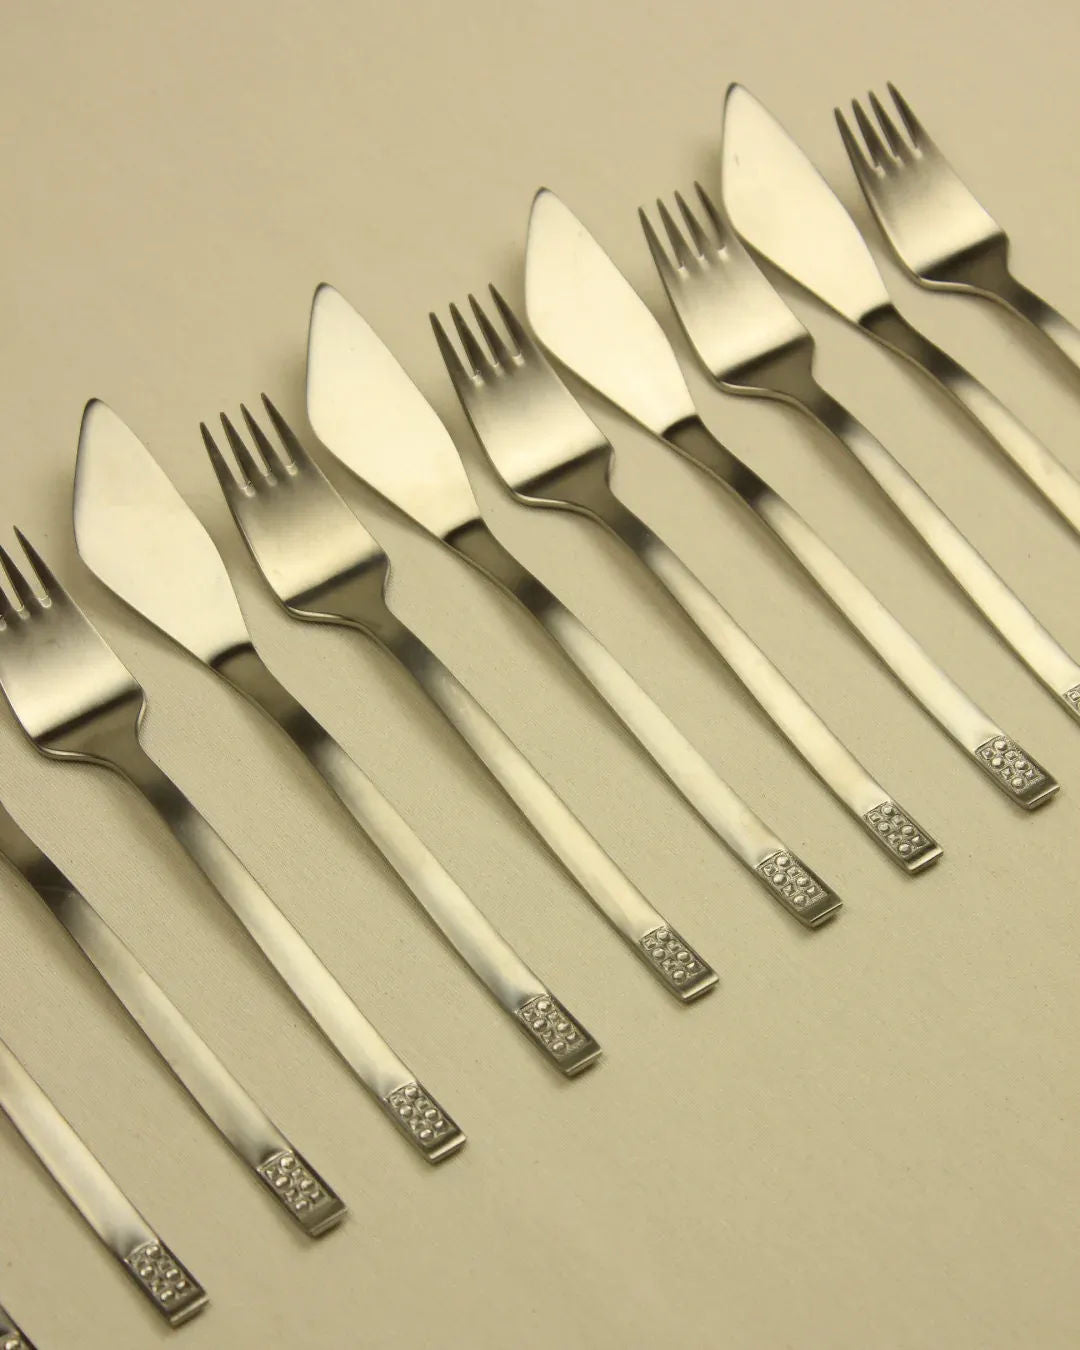 A symmetrical arrangement of Boga Avante Shop's Cutlery Set 70s Style in satin stainless steel forks and knives on a beige background, showcasing alternating patterns with handles aligned in a straight line.